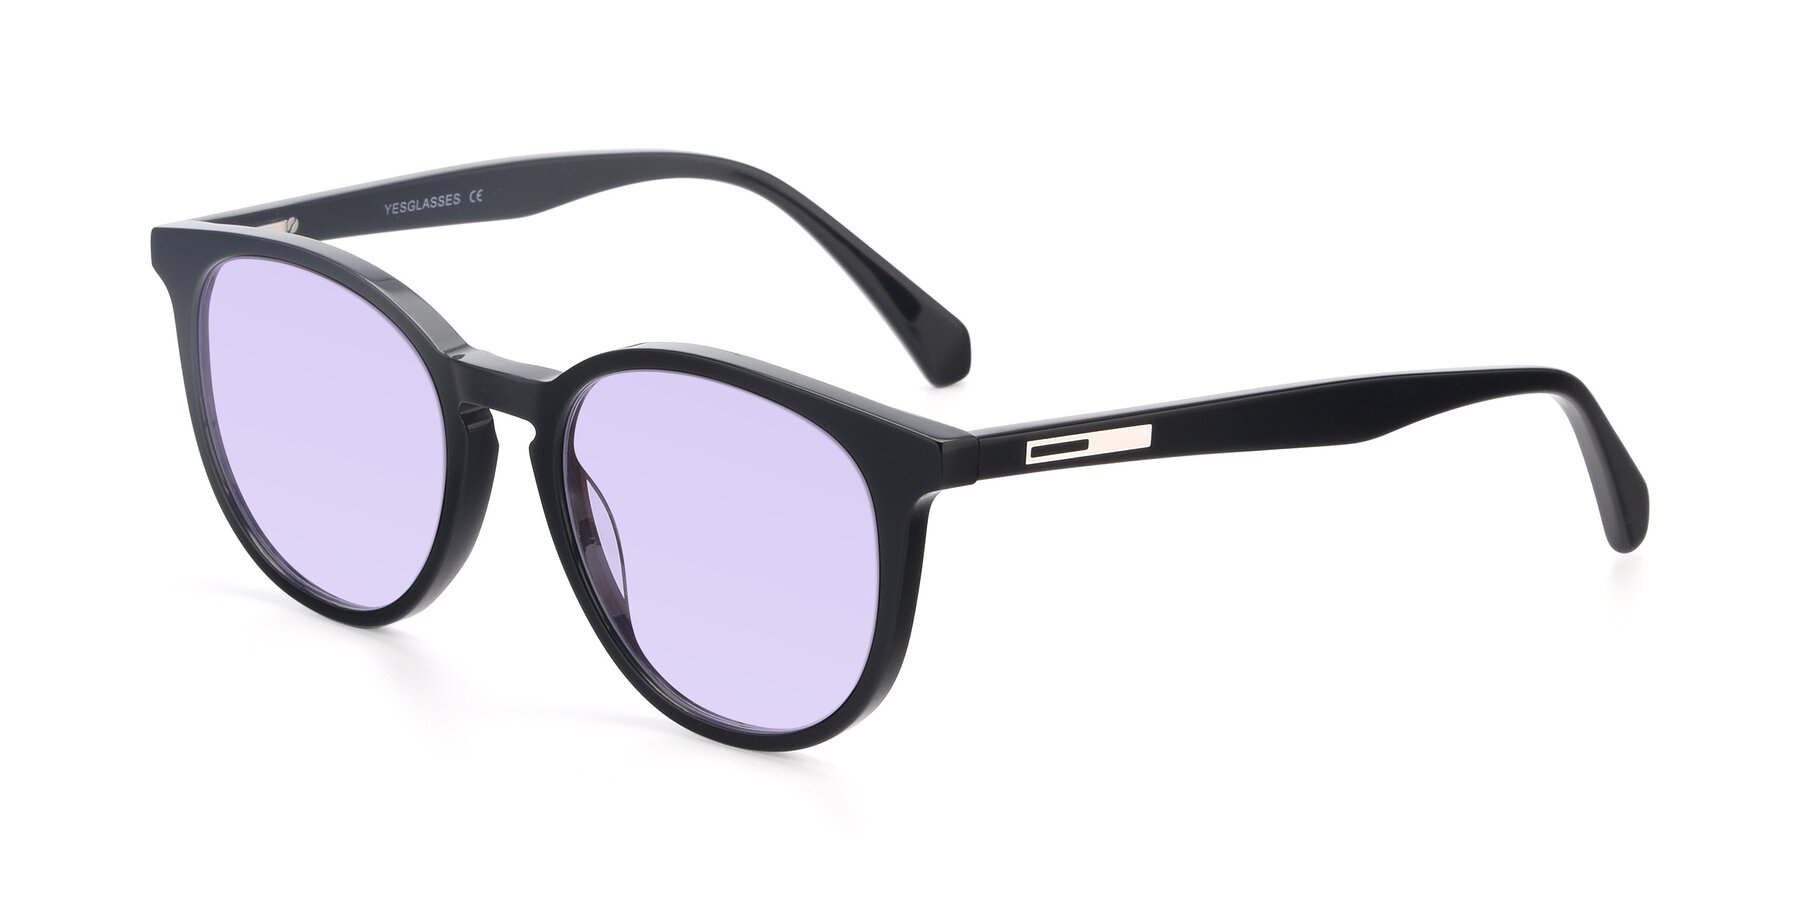 Angle of 17721 in Black with Light Purple Tinted Lenses